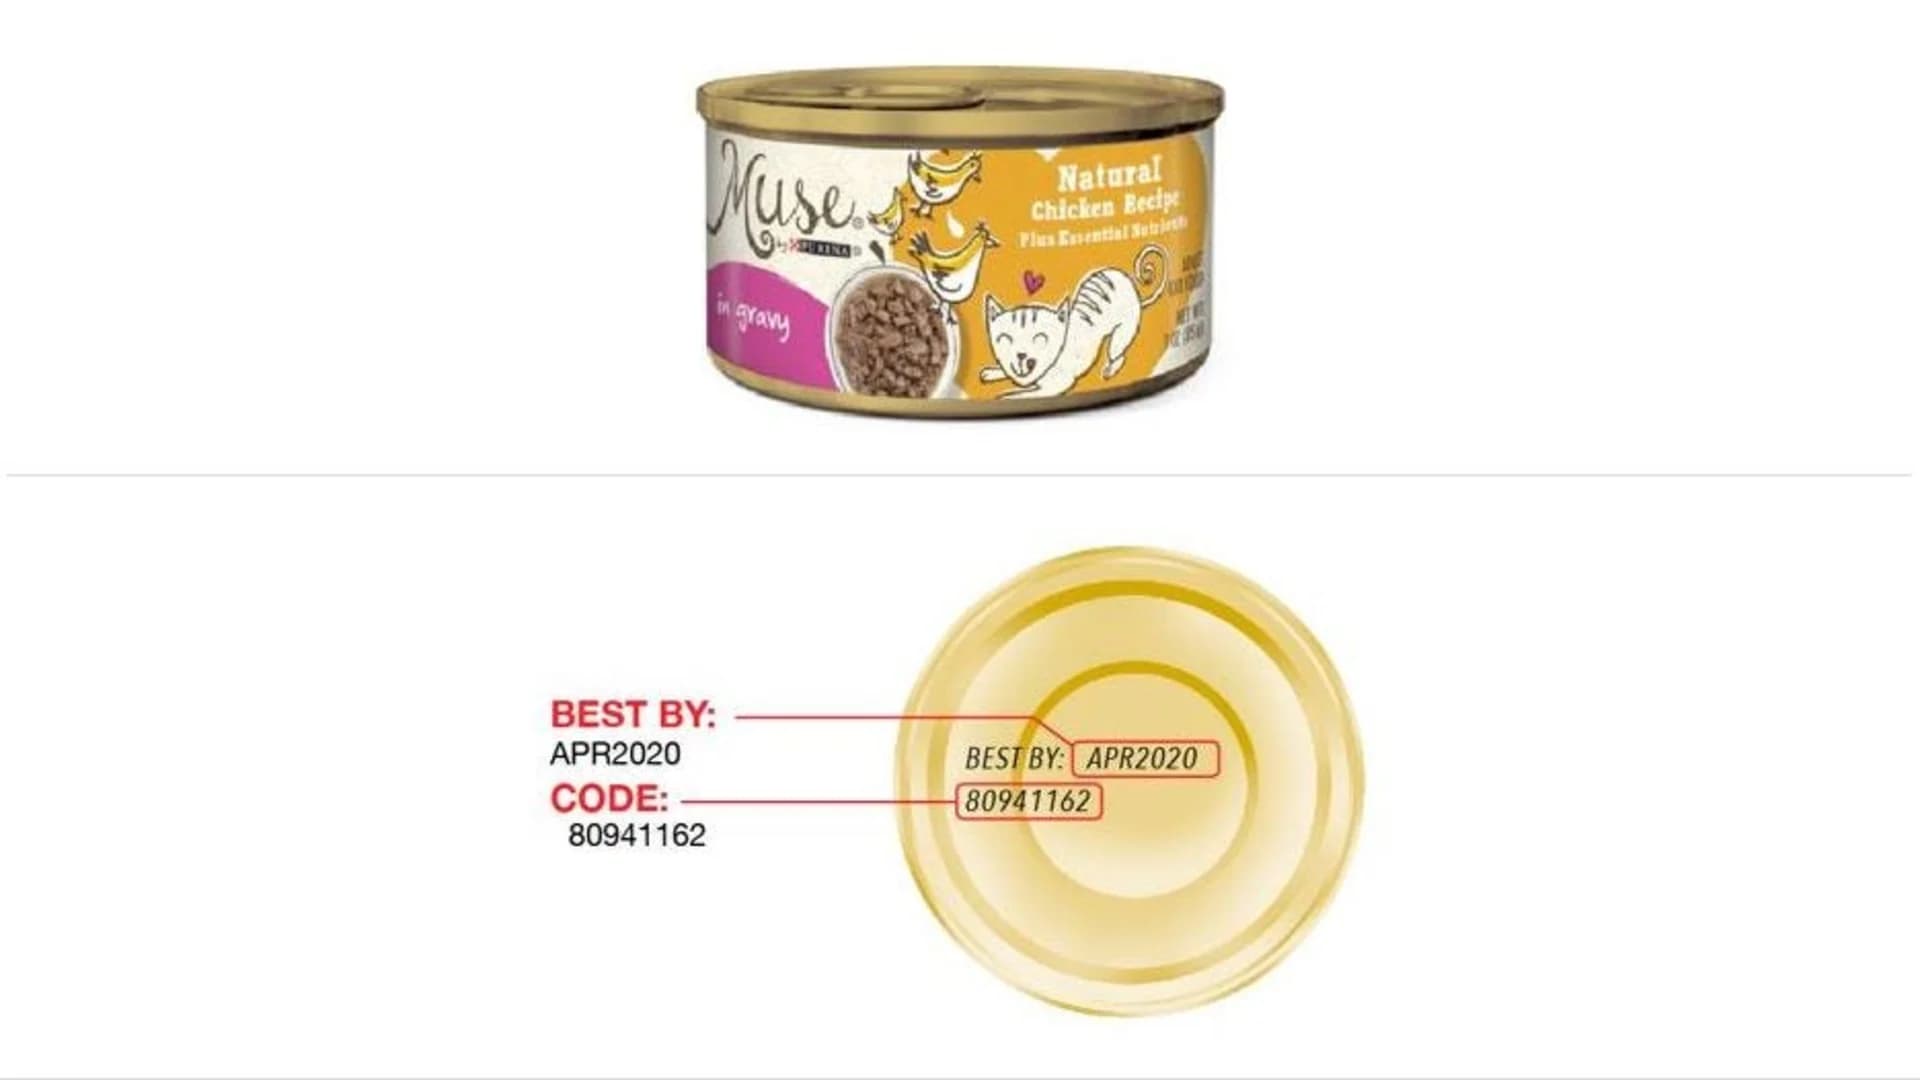 Rubber pieces found in cat food prompts recall